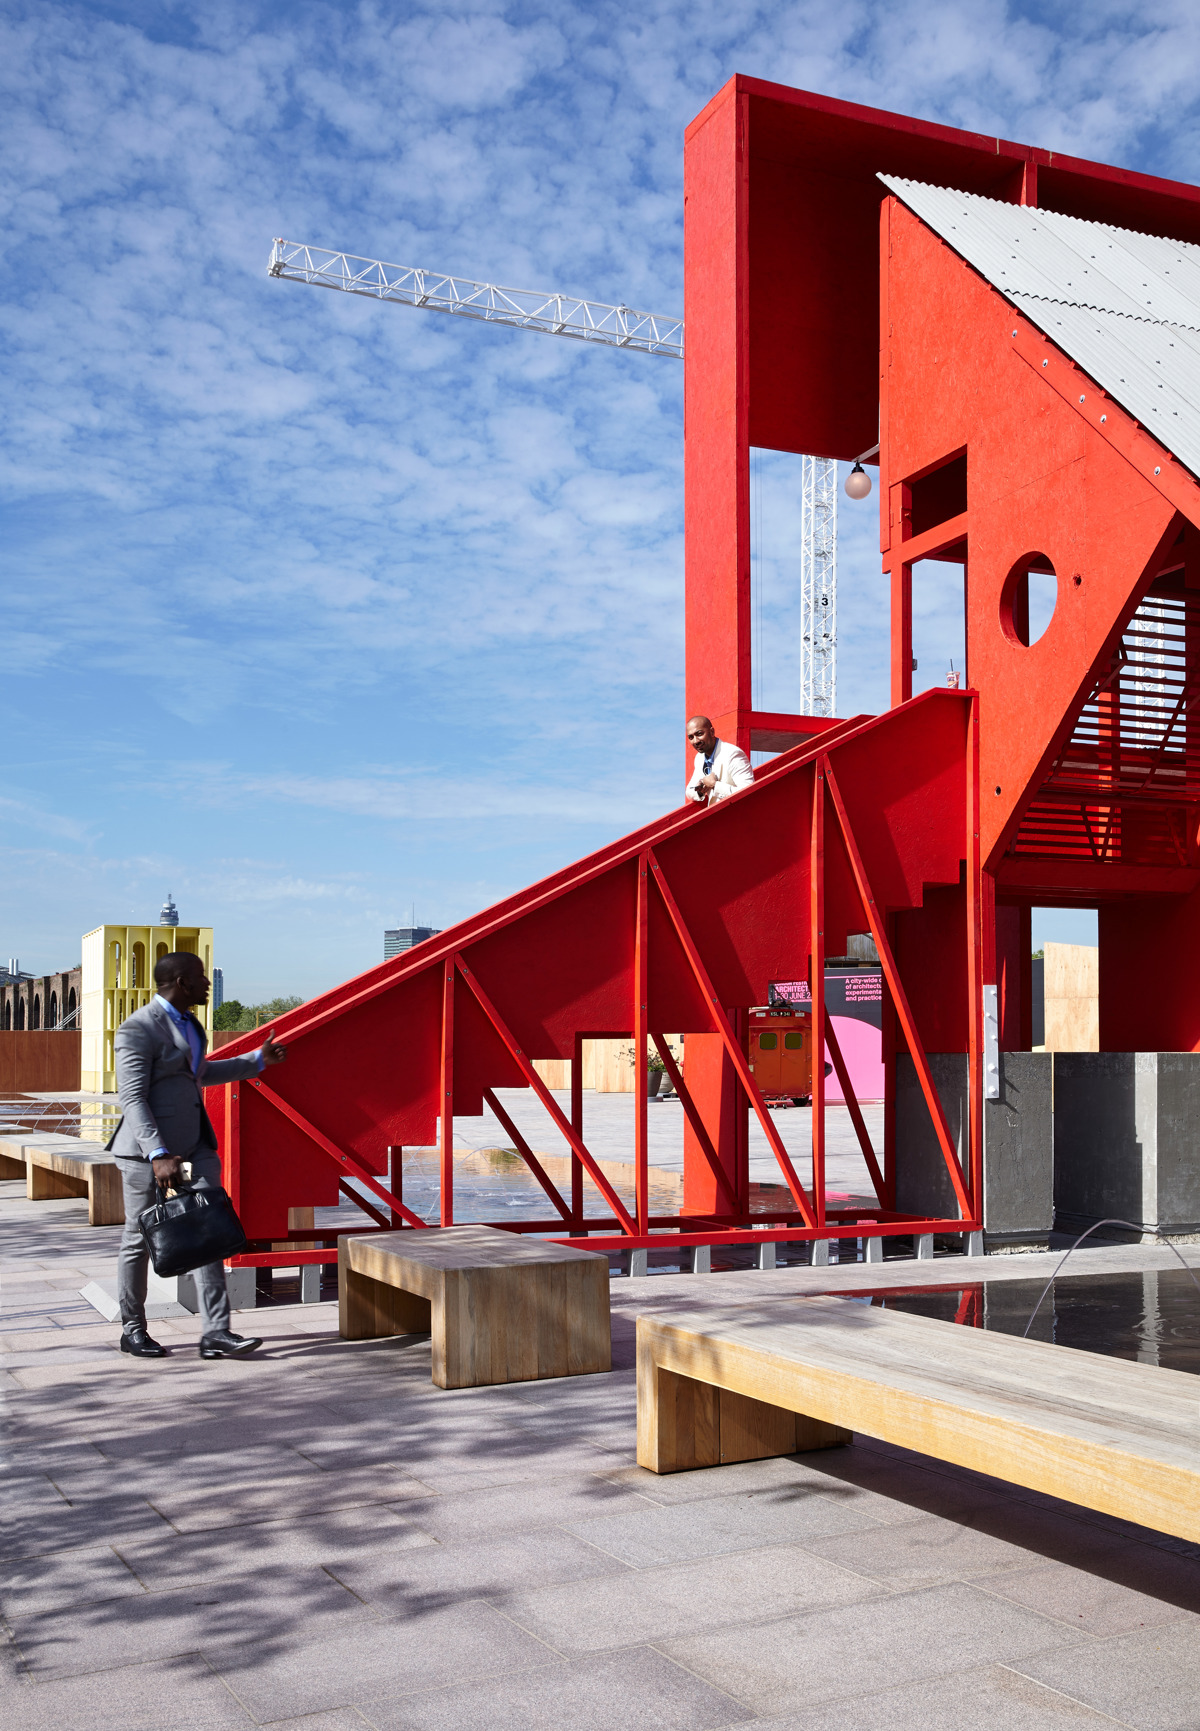 Building Of The Month  -  August 2015 -The Red Pavillion